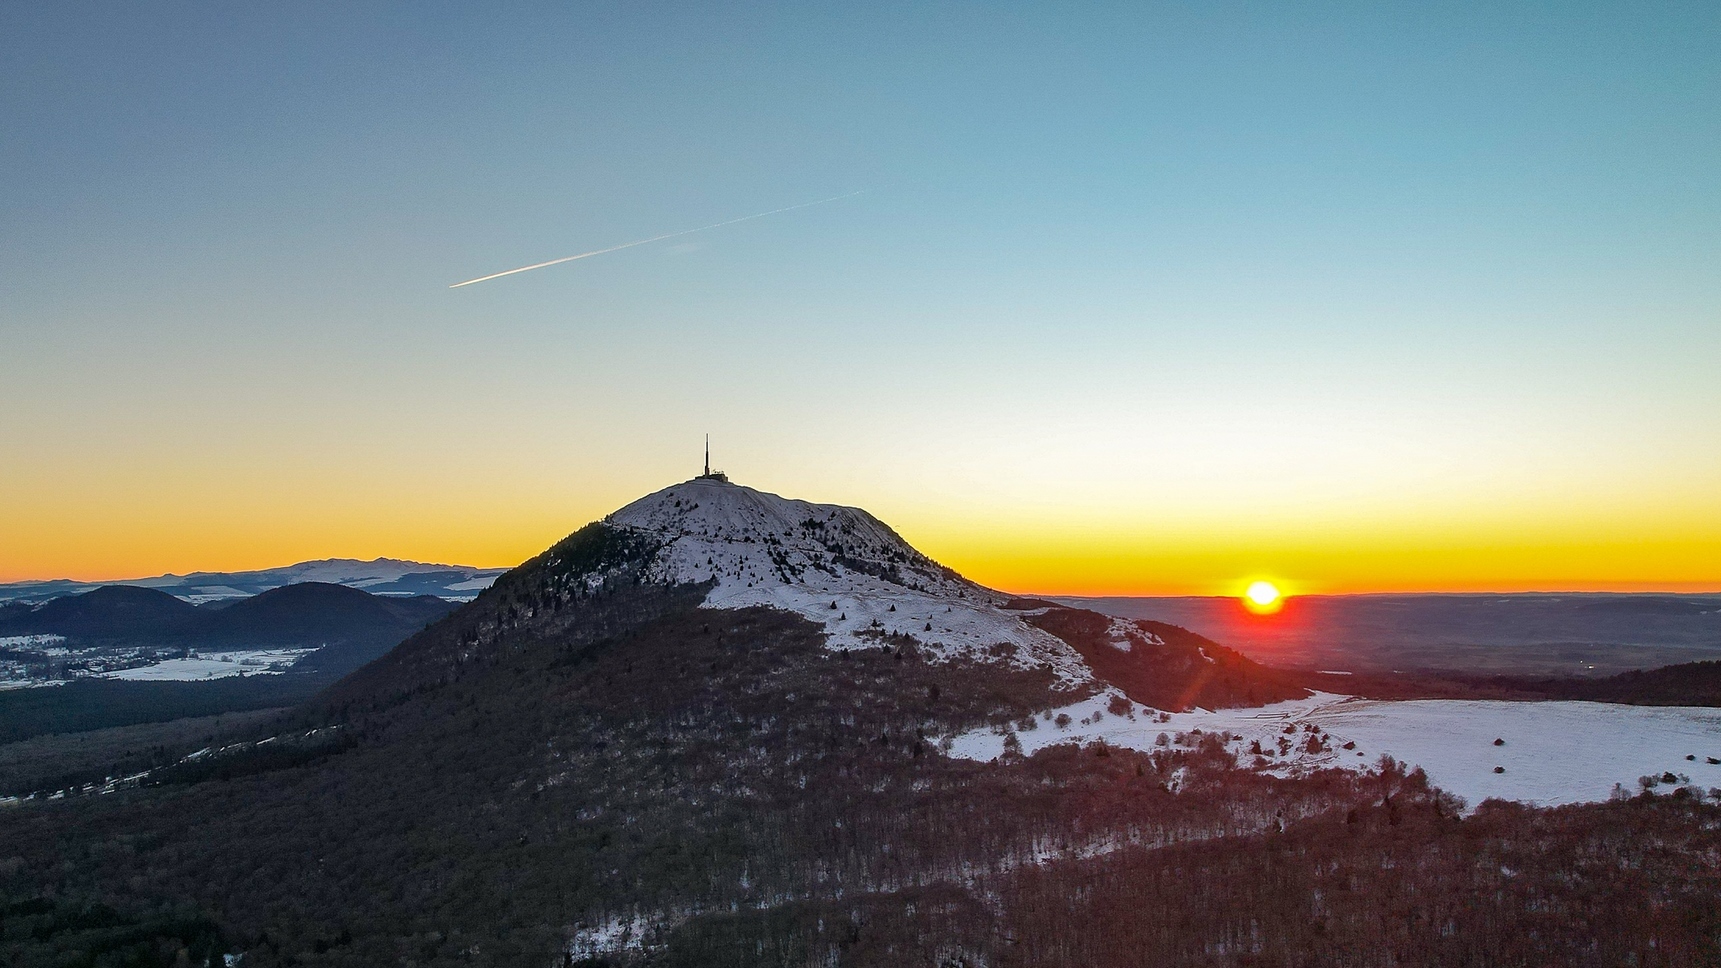 Sunset over the snow-capped Puy de Dome